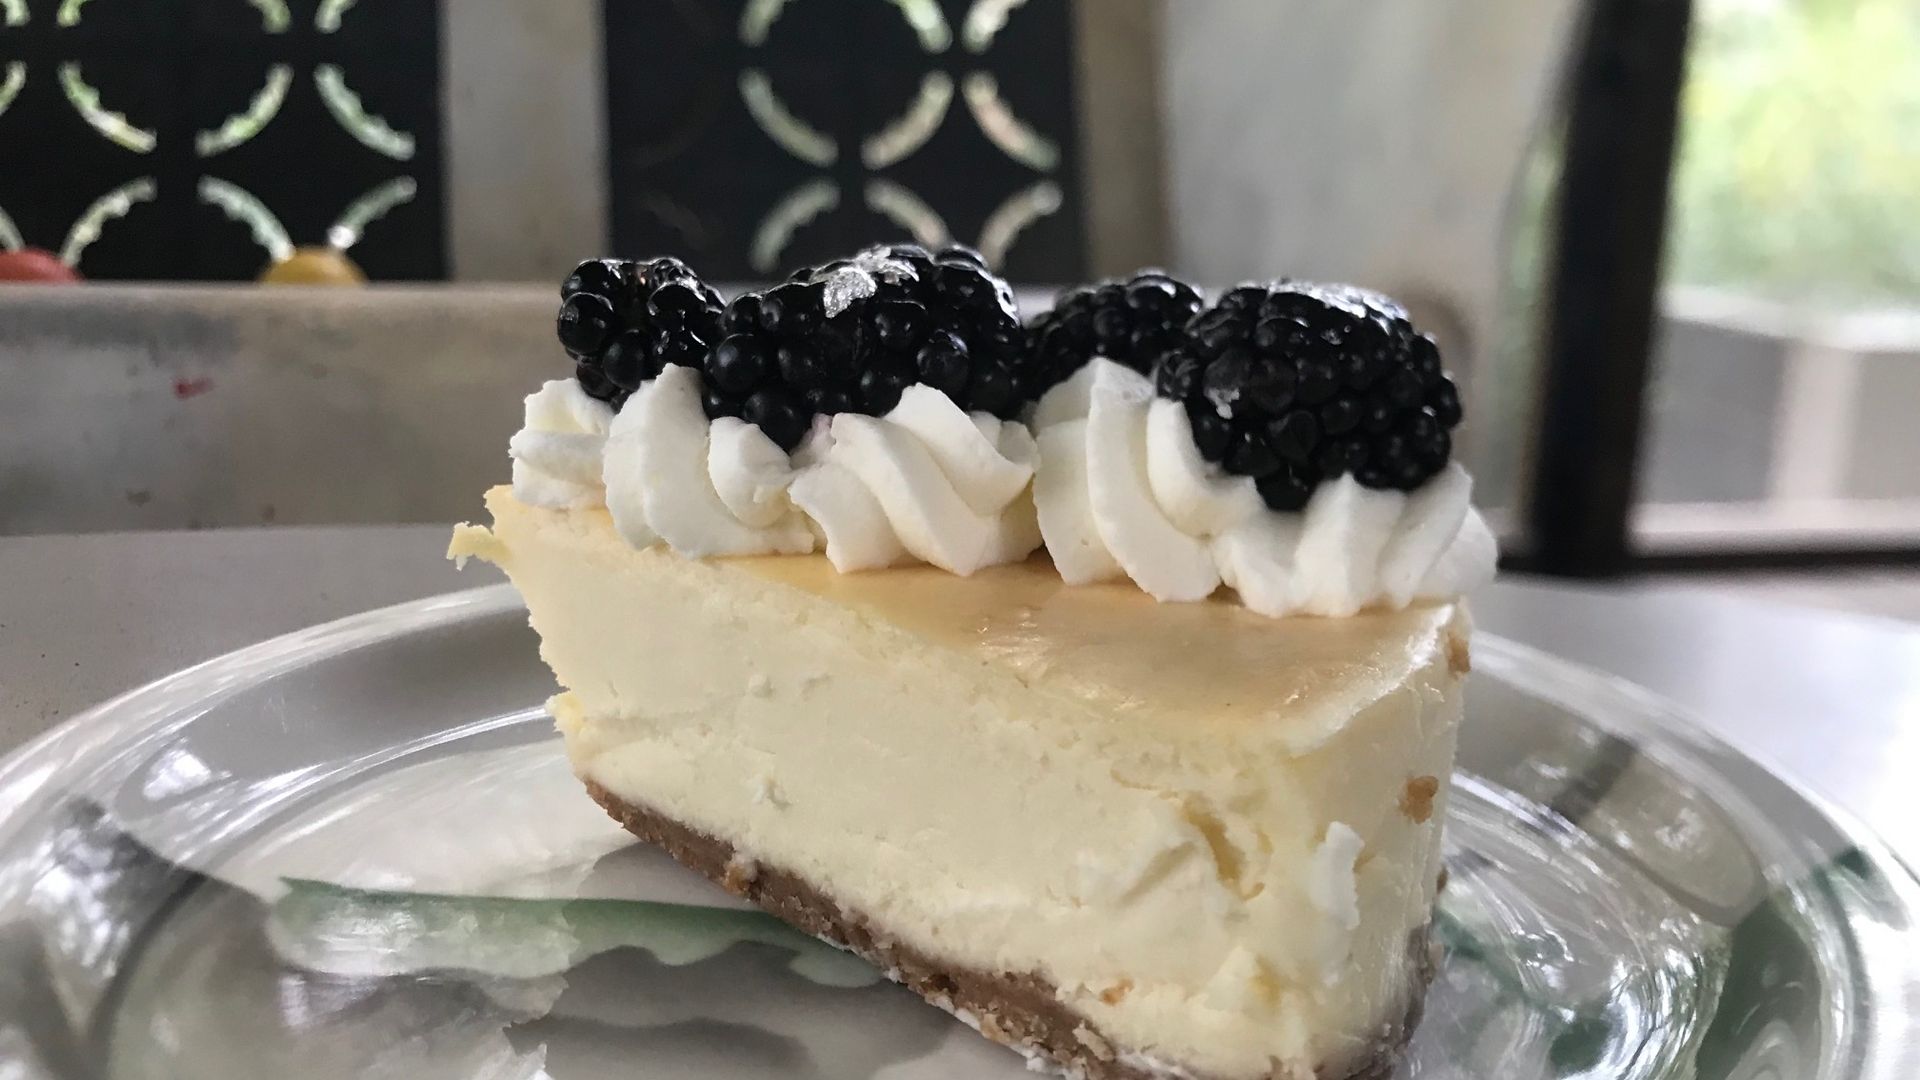 A slice of cheesecake with blackberries on top.